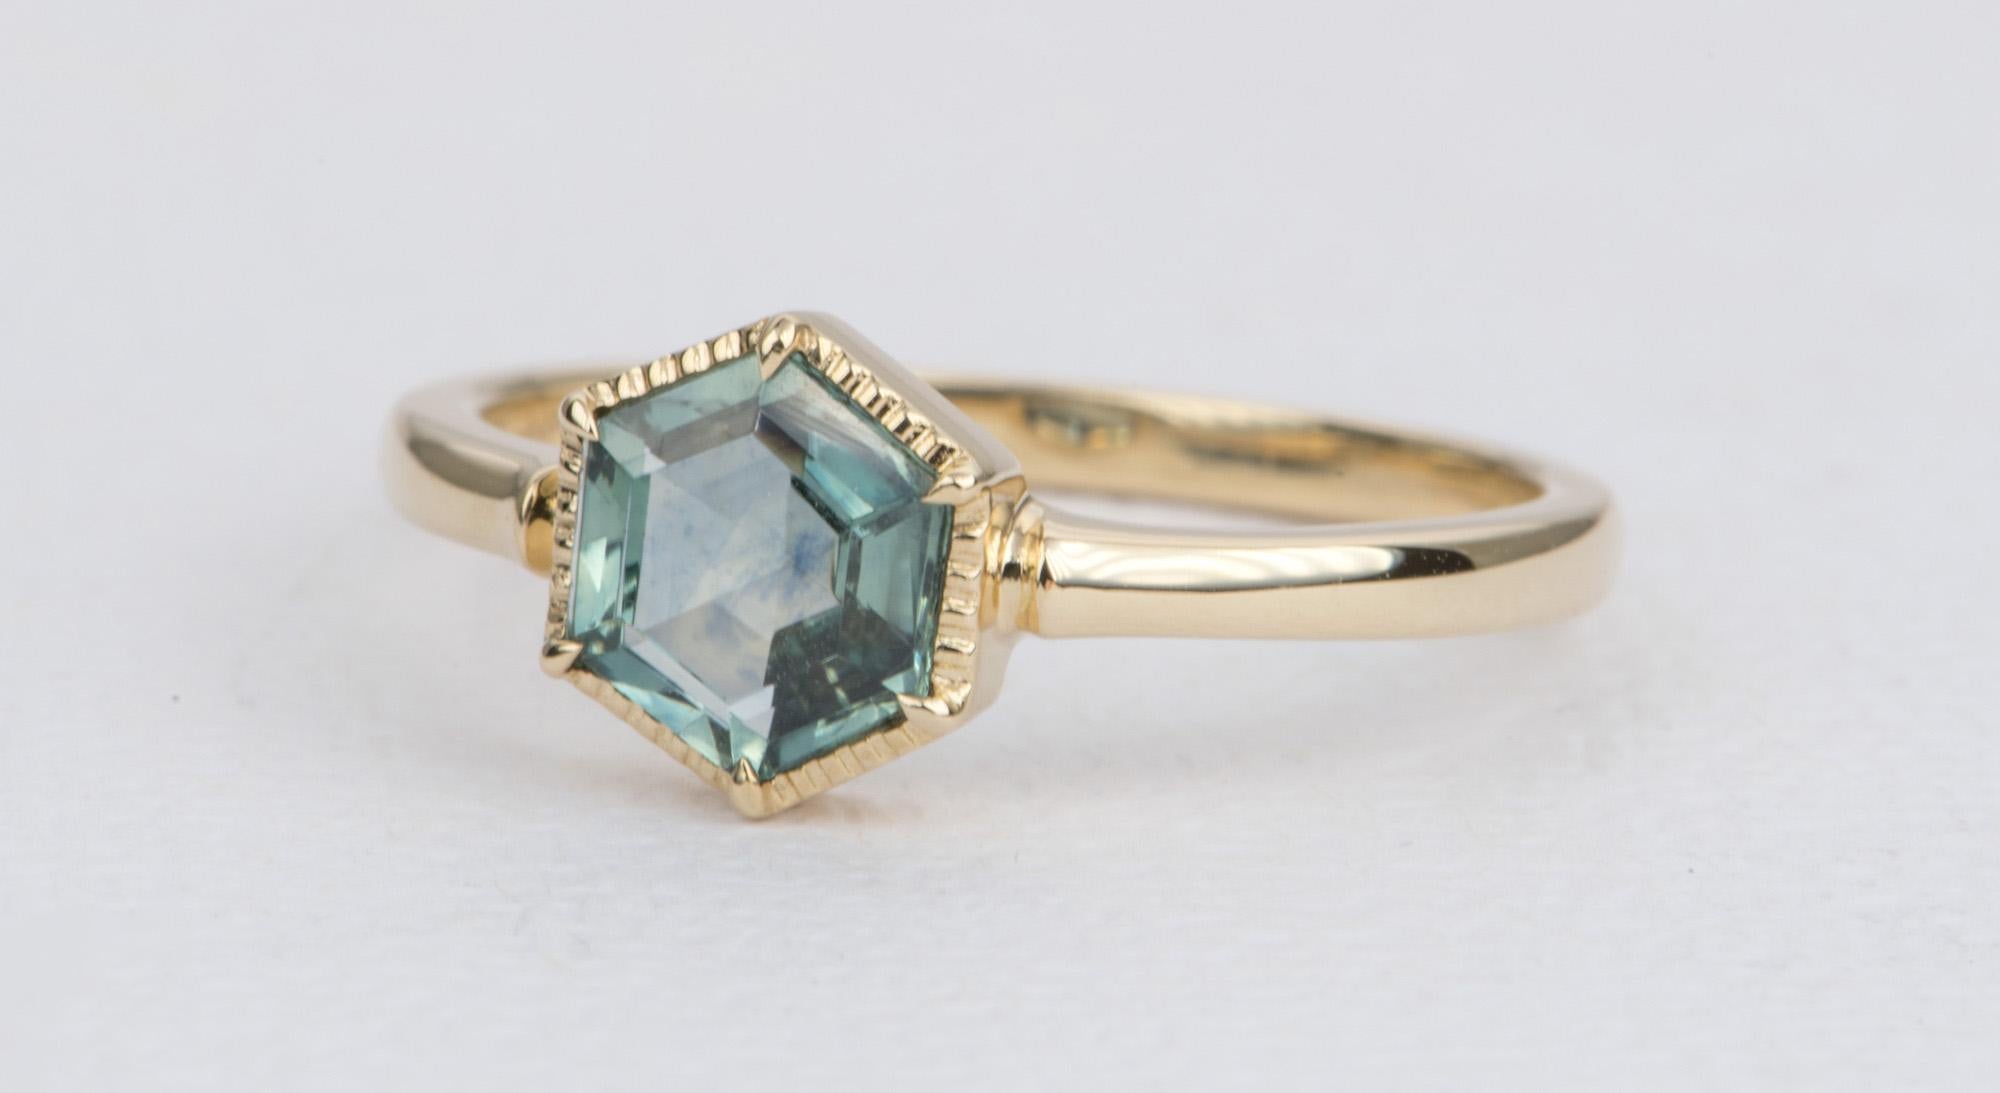 ♥  This blue-green Montana sapphire is secured with six small pointy prongs on each corner.
♥  Surrounded by a milgrain halo, this solitaire sapphire is set on 14K yellow gold.

♥  US Size 6.5 (Free resizing)
♥  Band width: 1.85mm
♥  Material: 14K